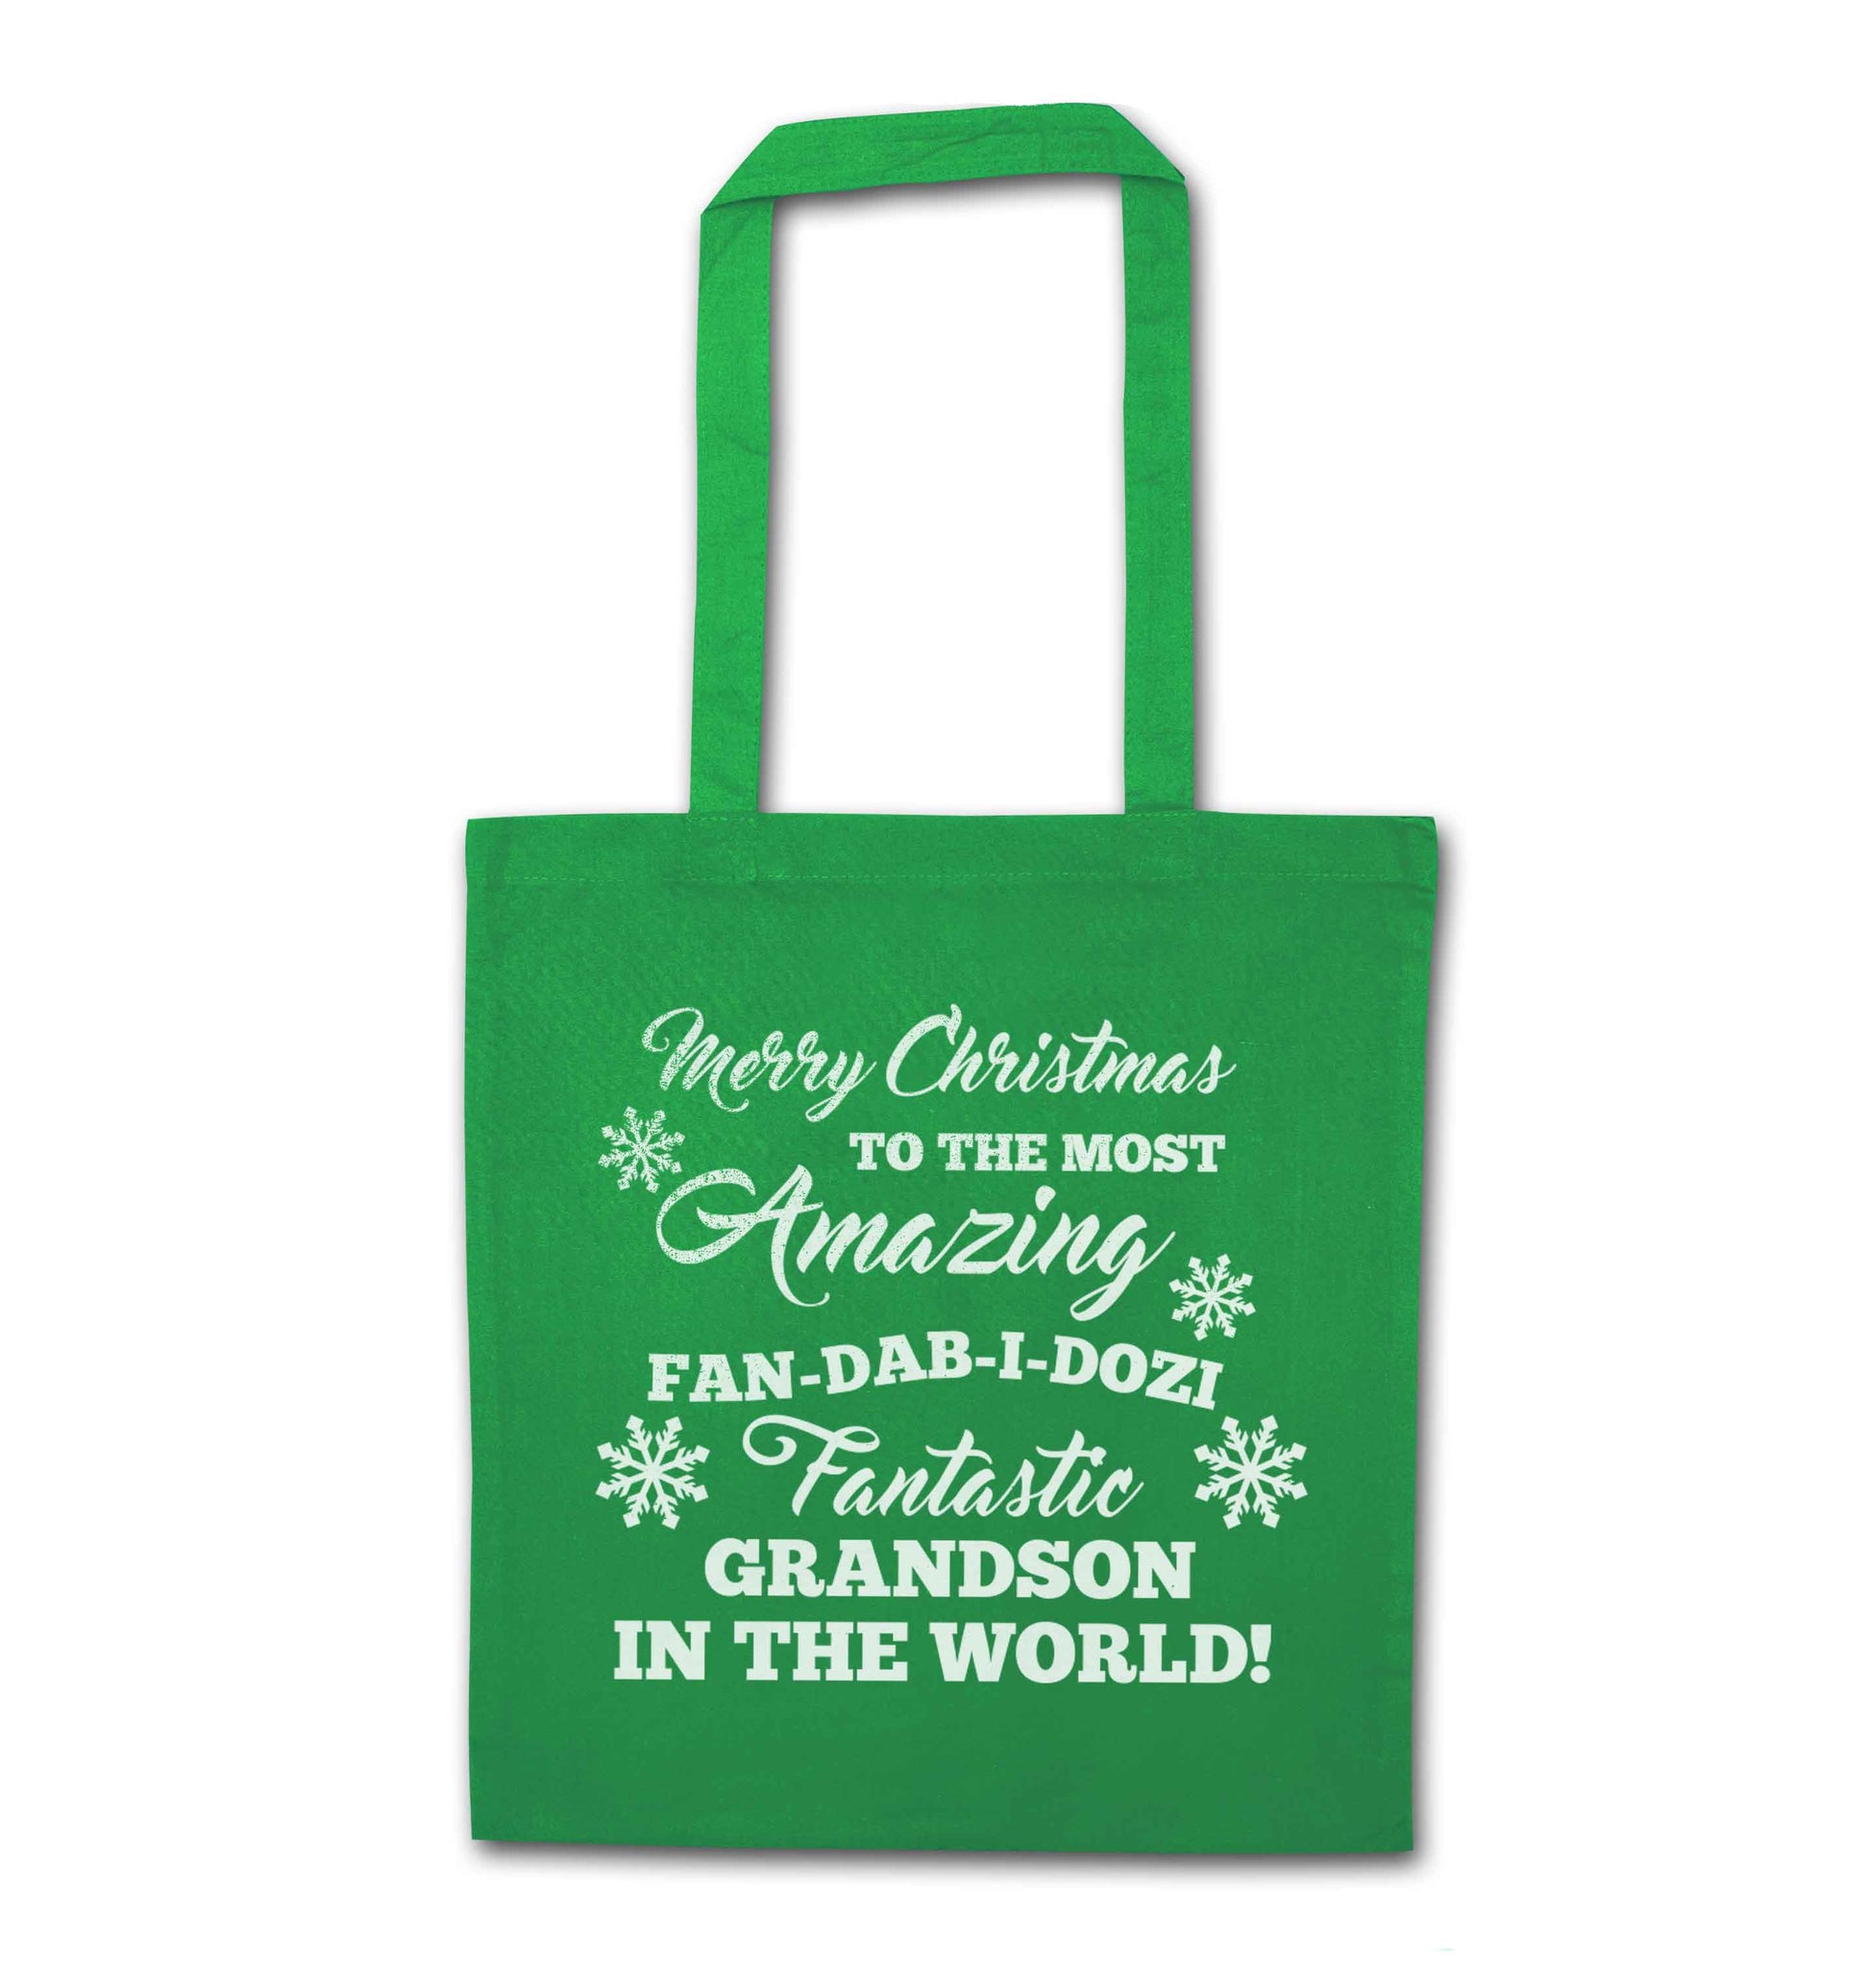 Merry Christmas to the most amazing fan-dab-i-dozi fantasic Grandson in the world green tote bag